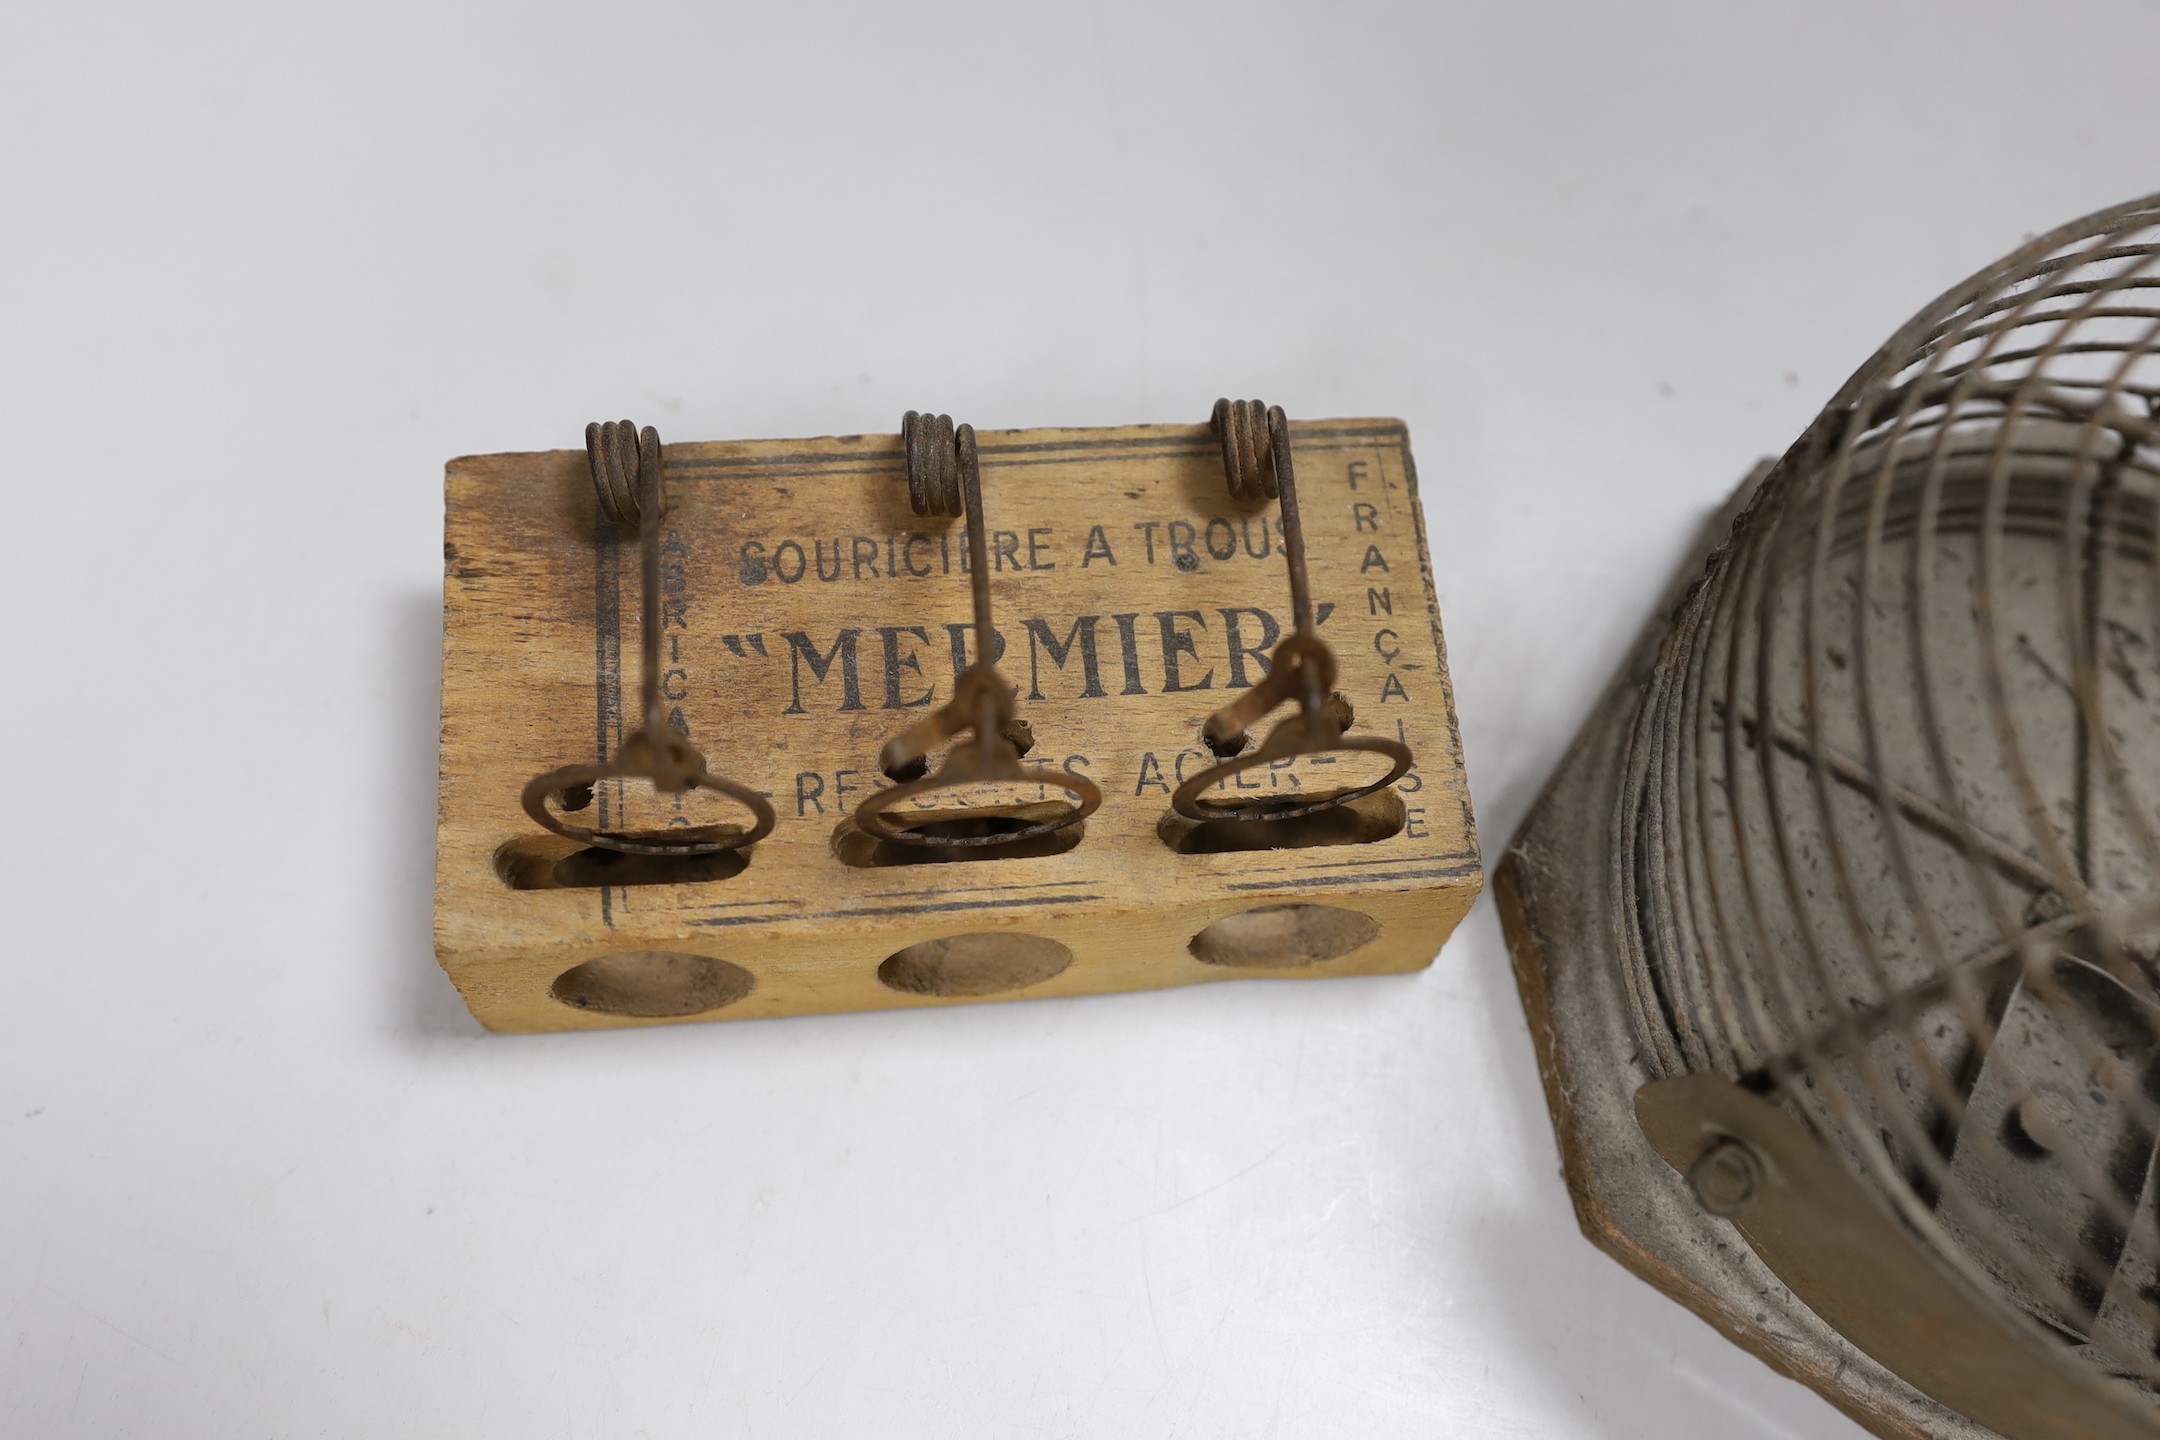 A circular metal mouse trap and a Mermier mouse trap